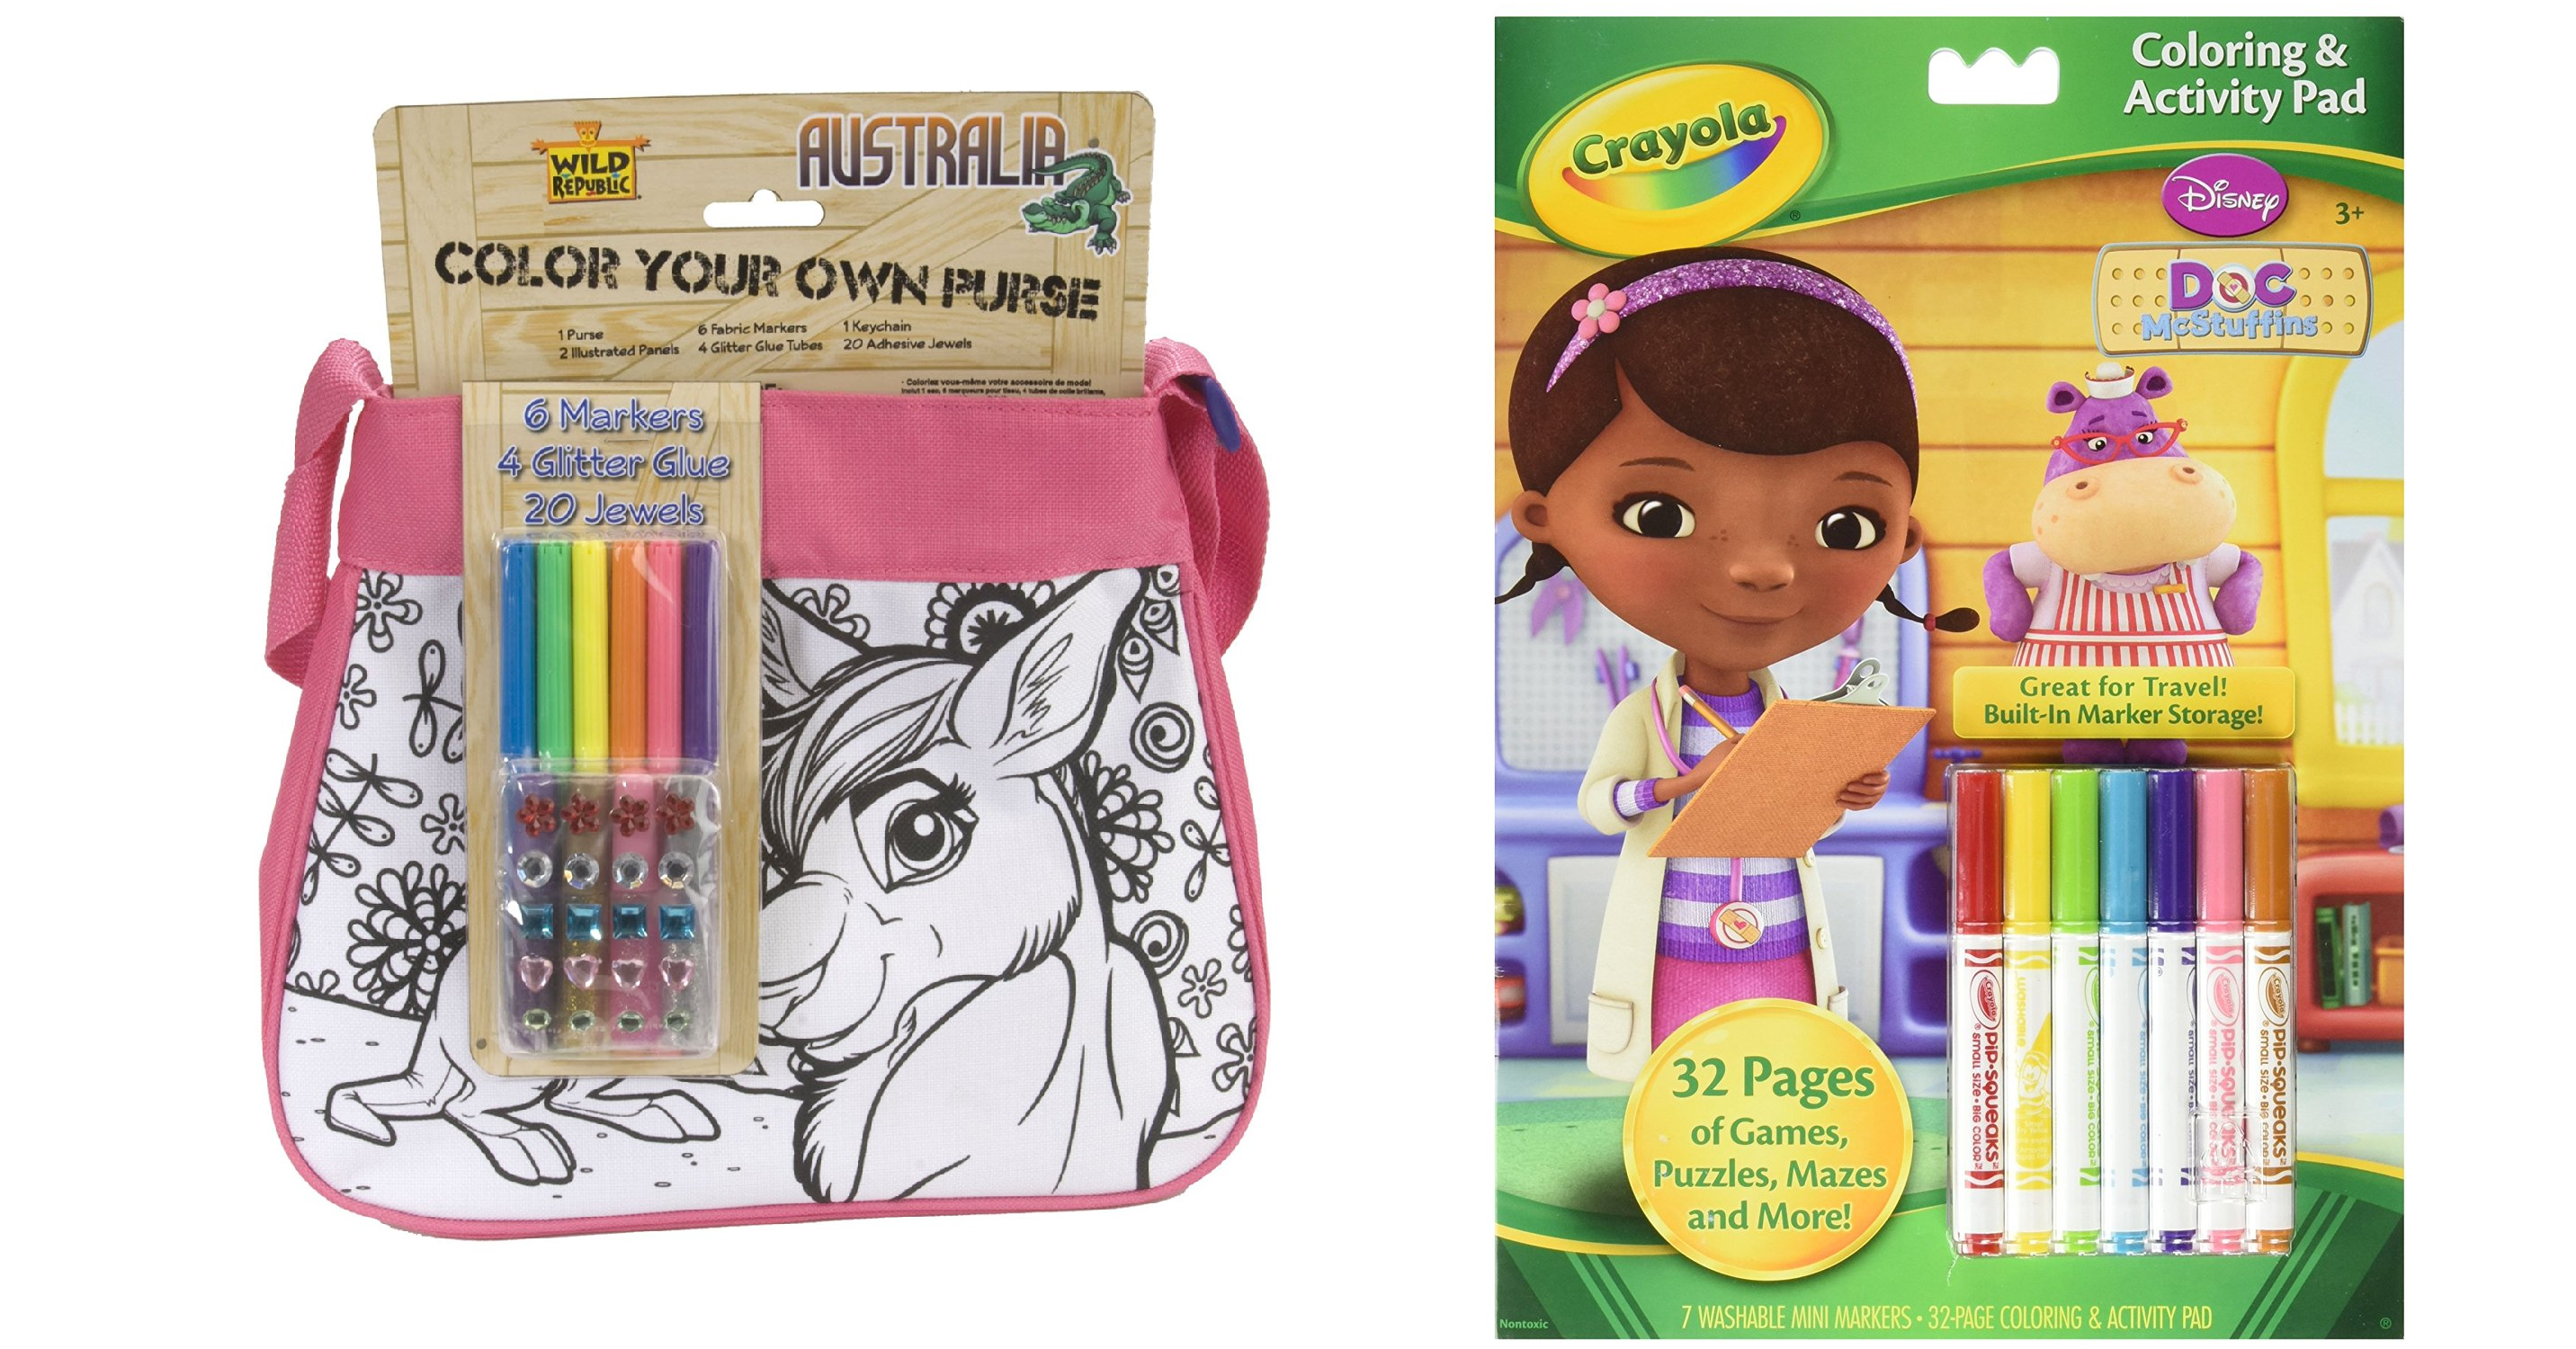 Great Gift Closet Ideas! Wild Republic Do-It-Your-Own Australia Purse Only $5.73 + Crayola Barbie Coloring & Activity Book w/ Markers Only $3.82!